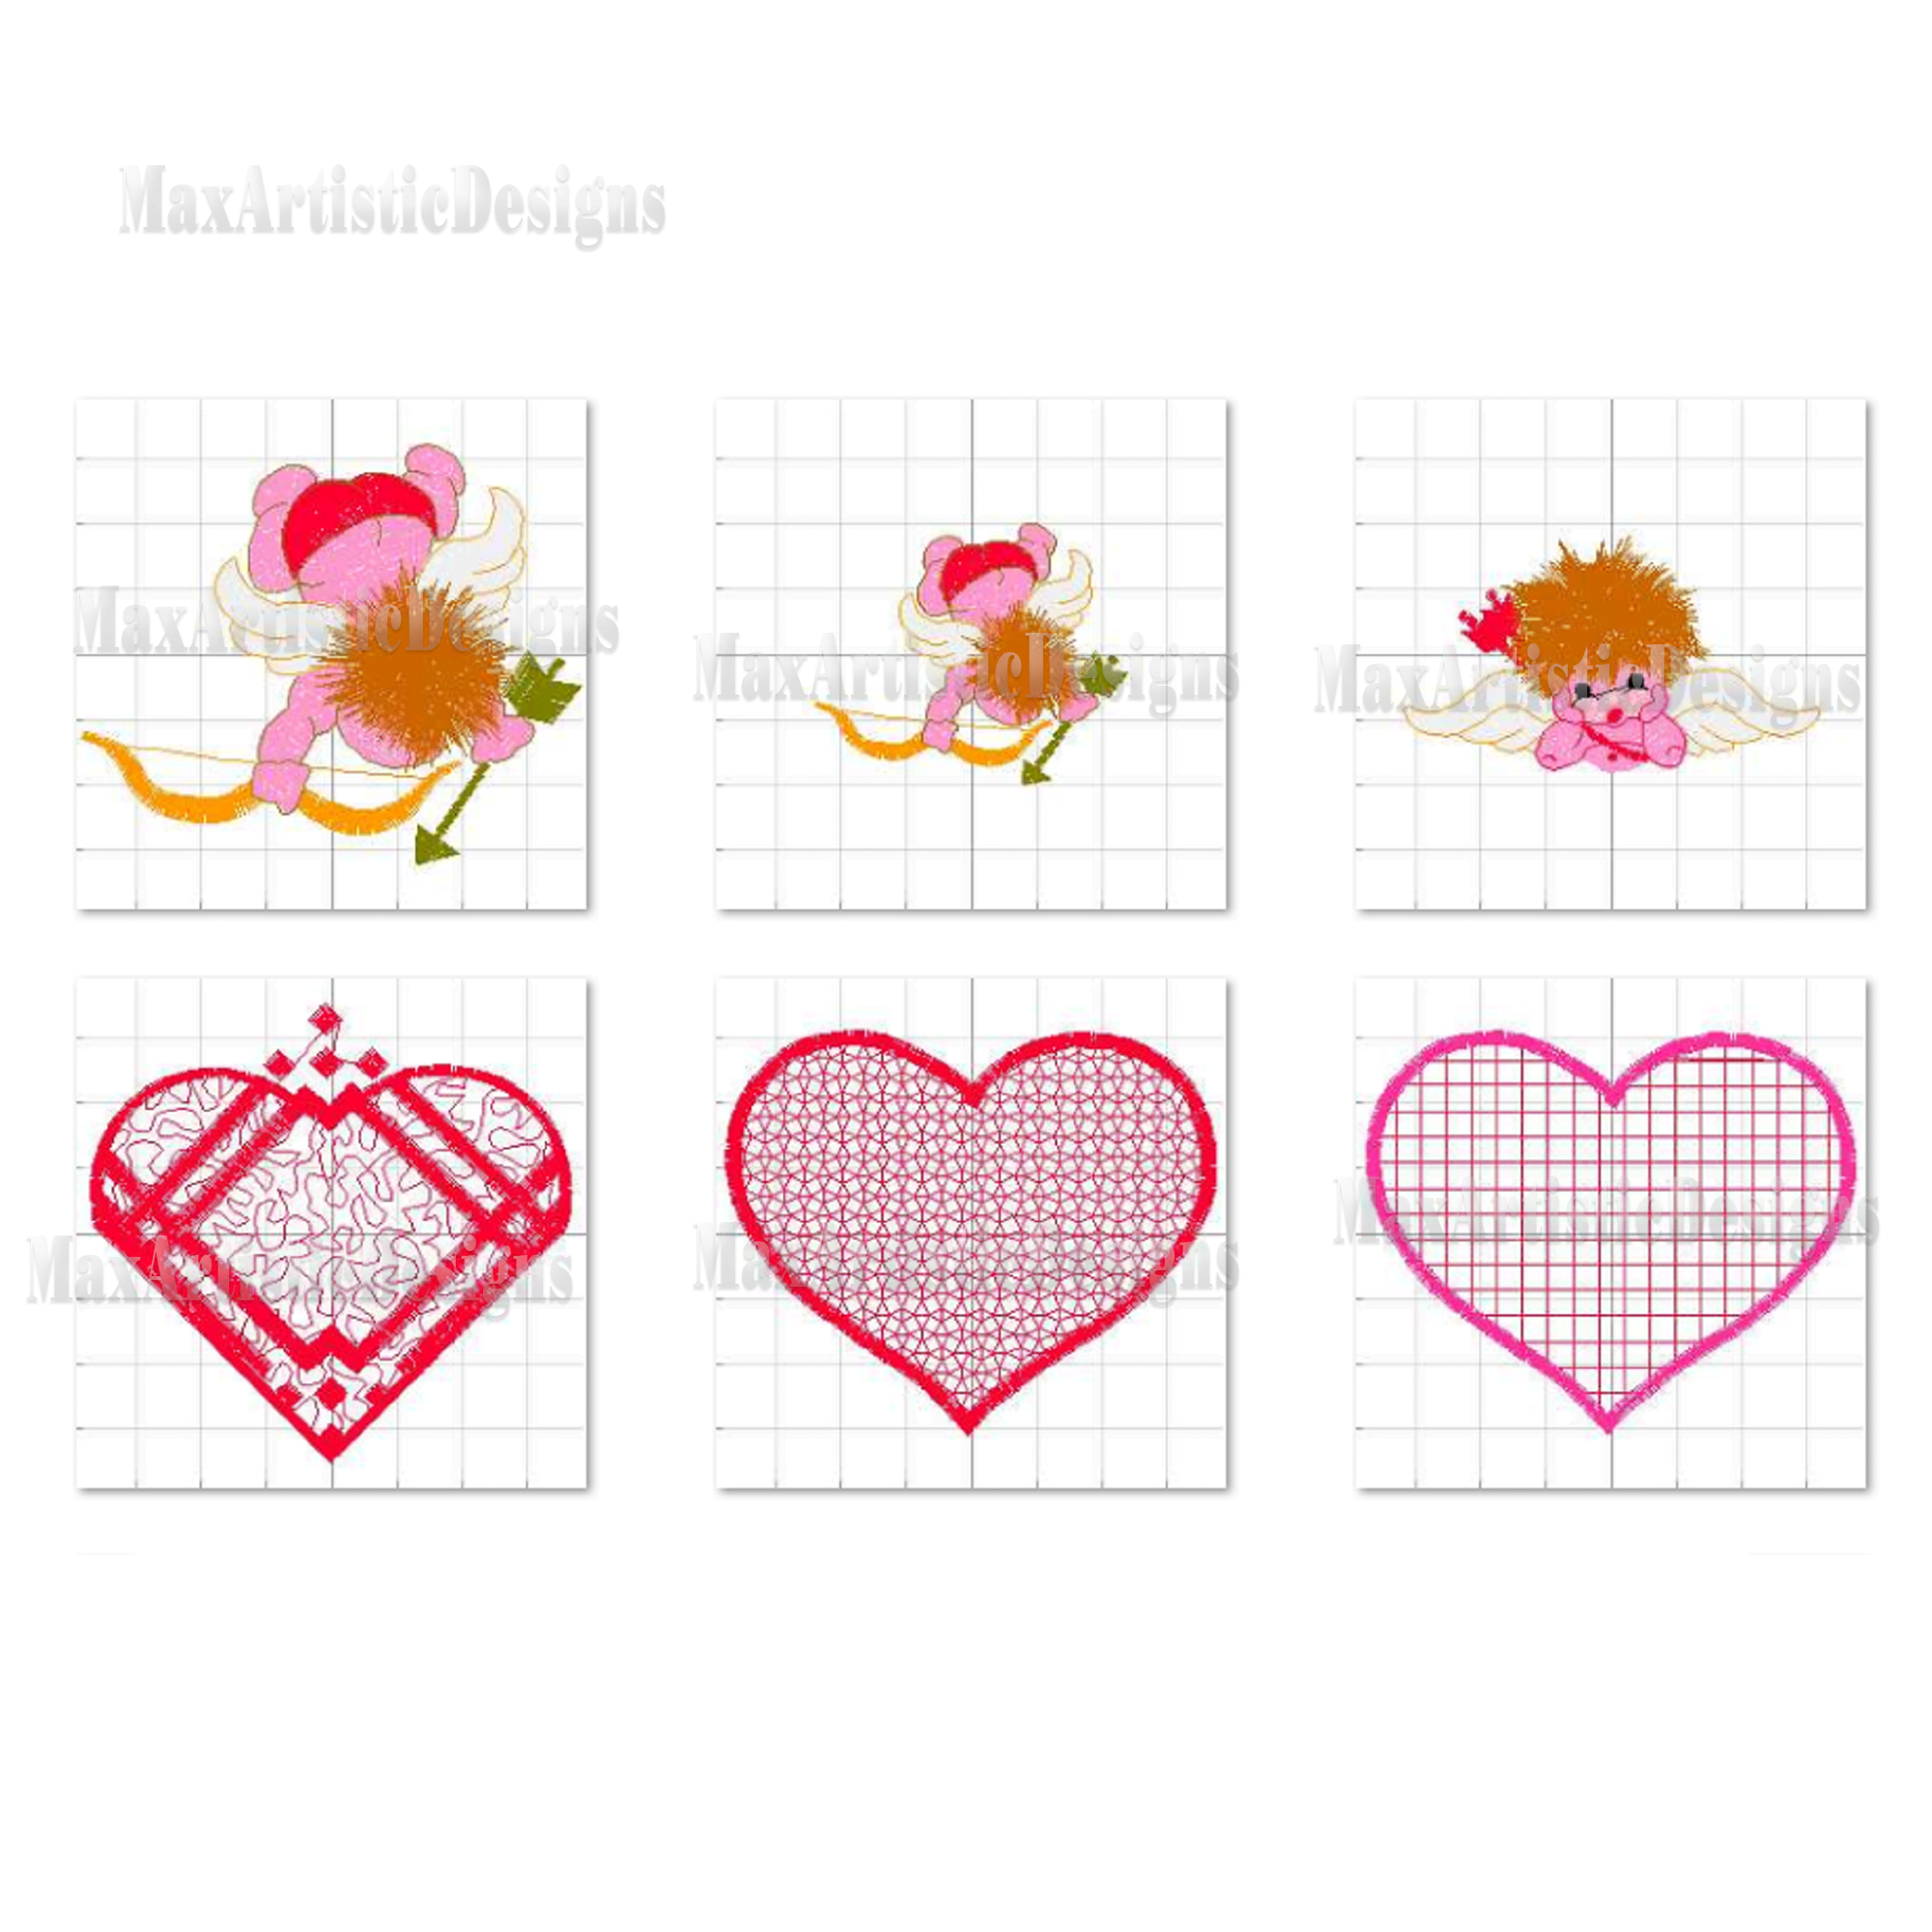 115 romance and love patterns for machine embroidery pes jpg format download